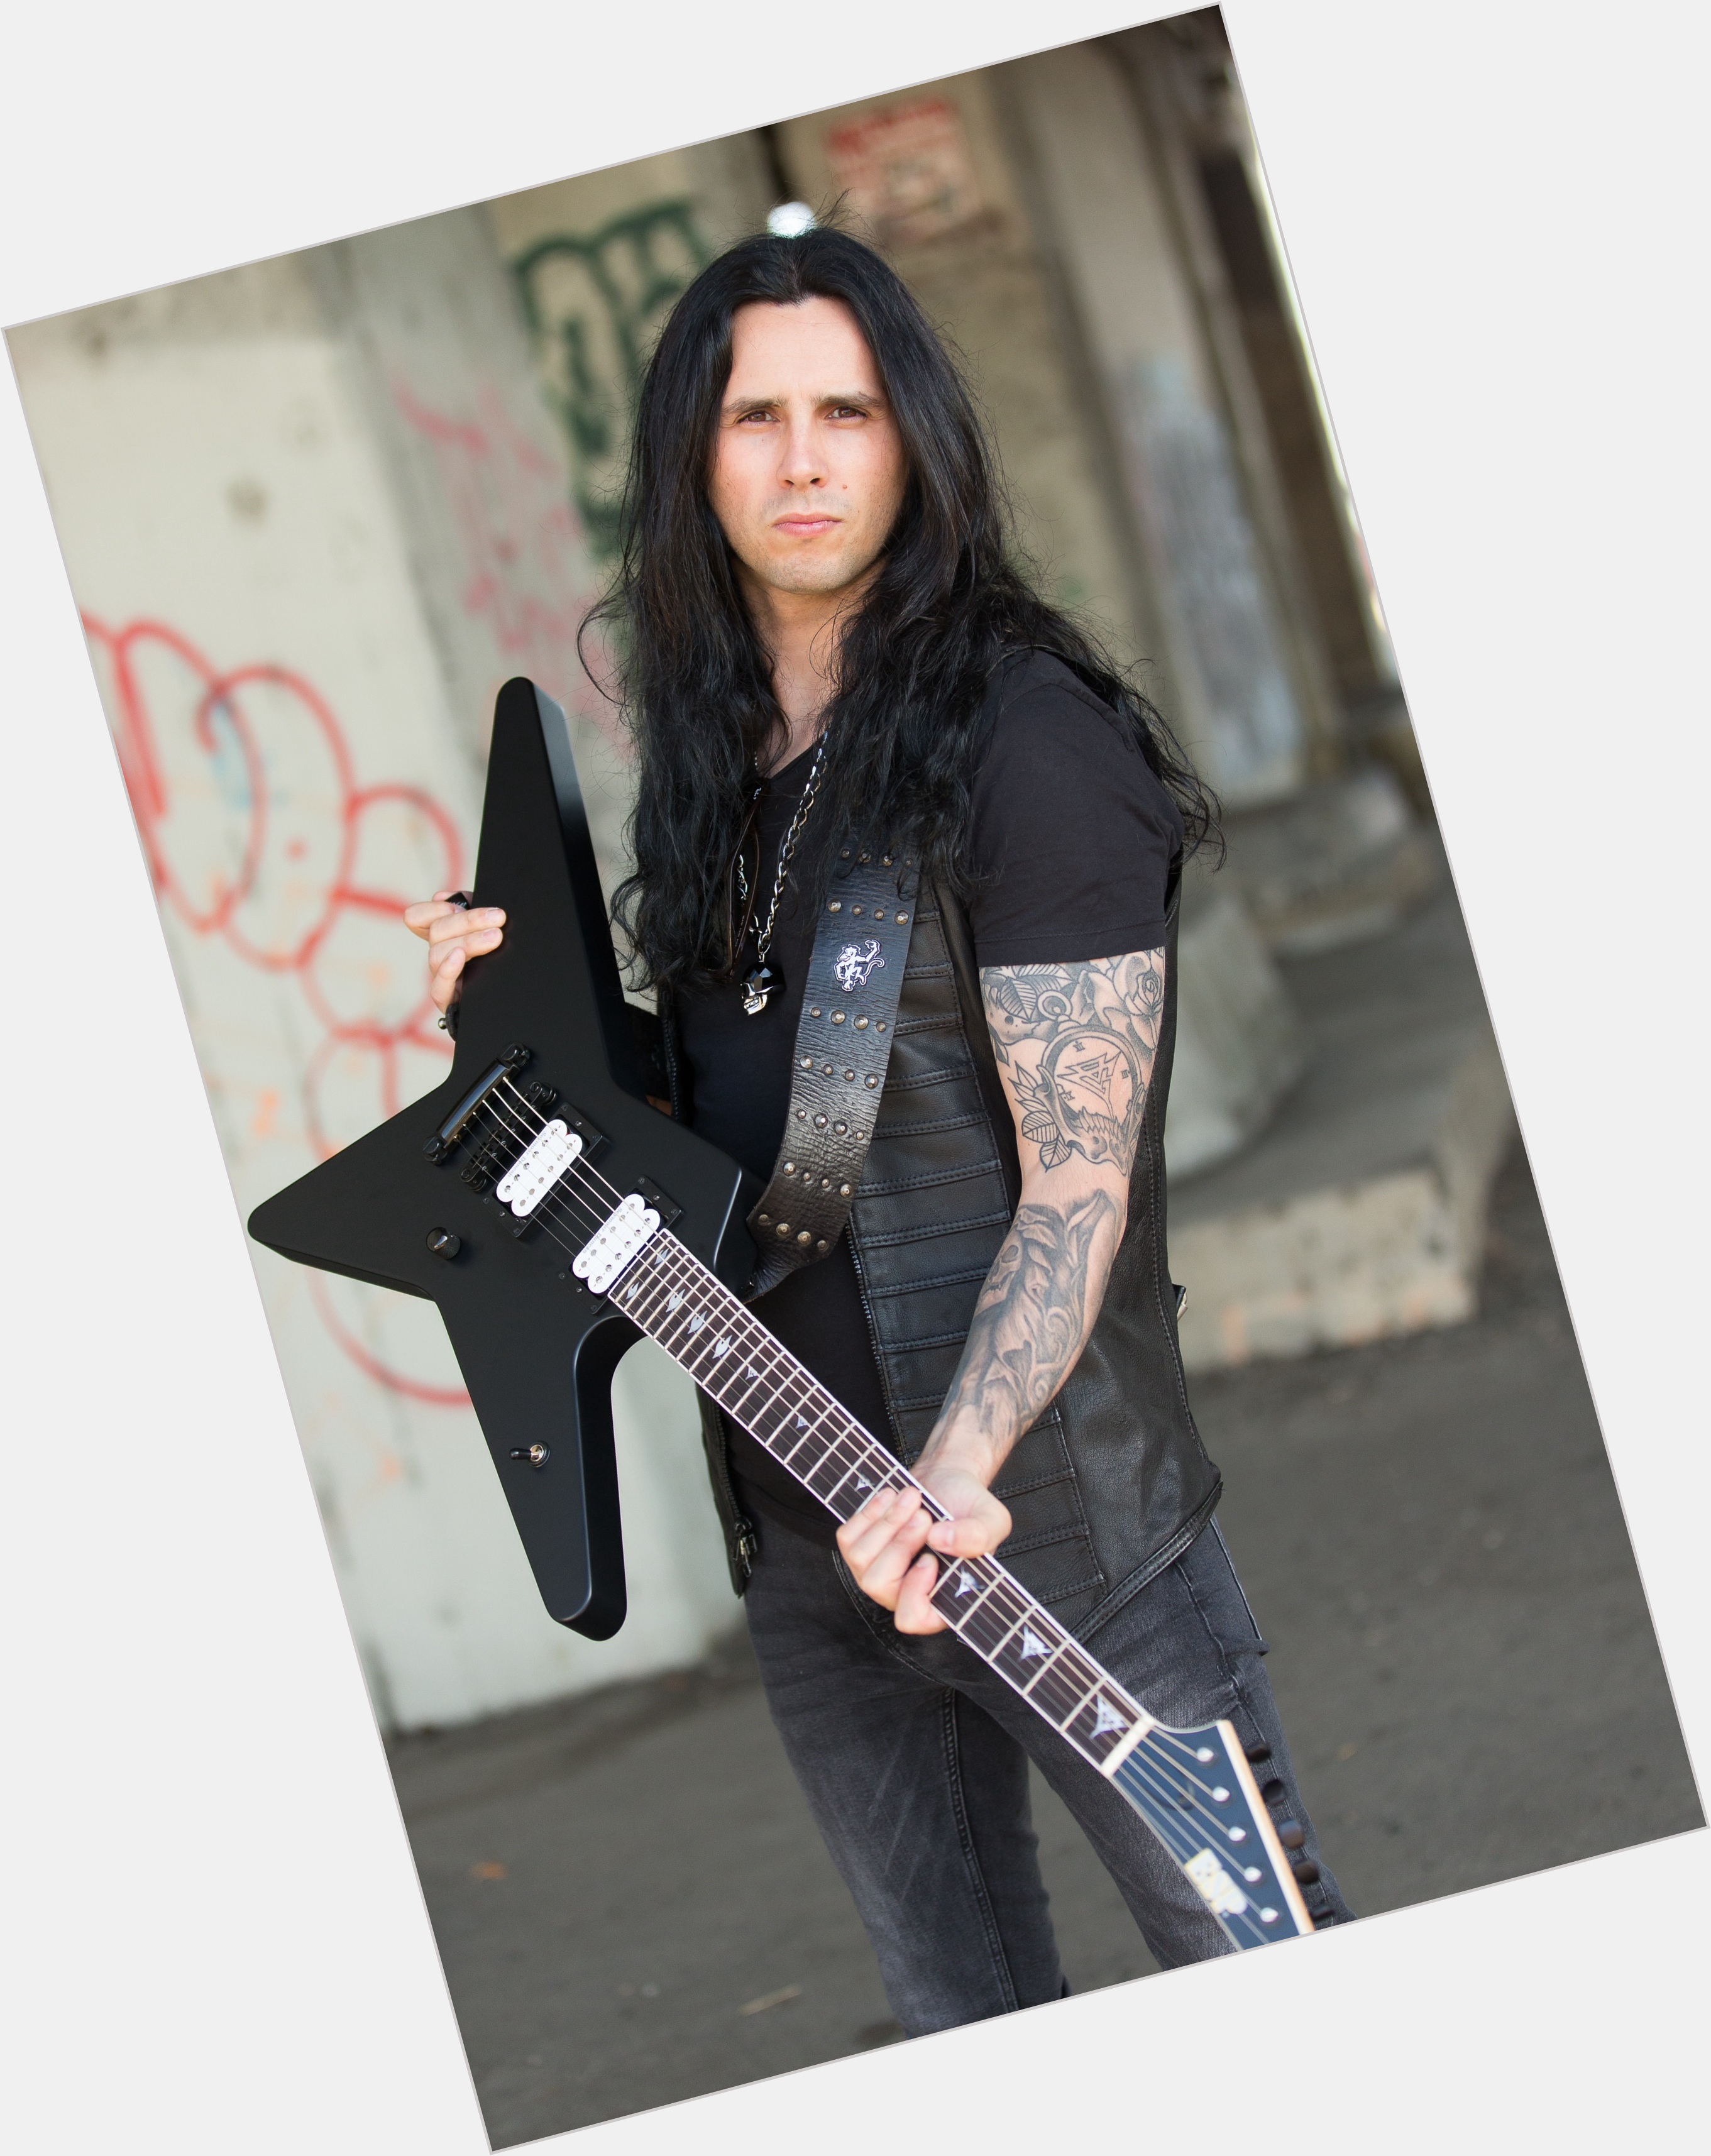 Gus G  dating 2